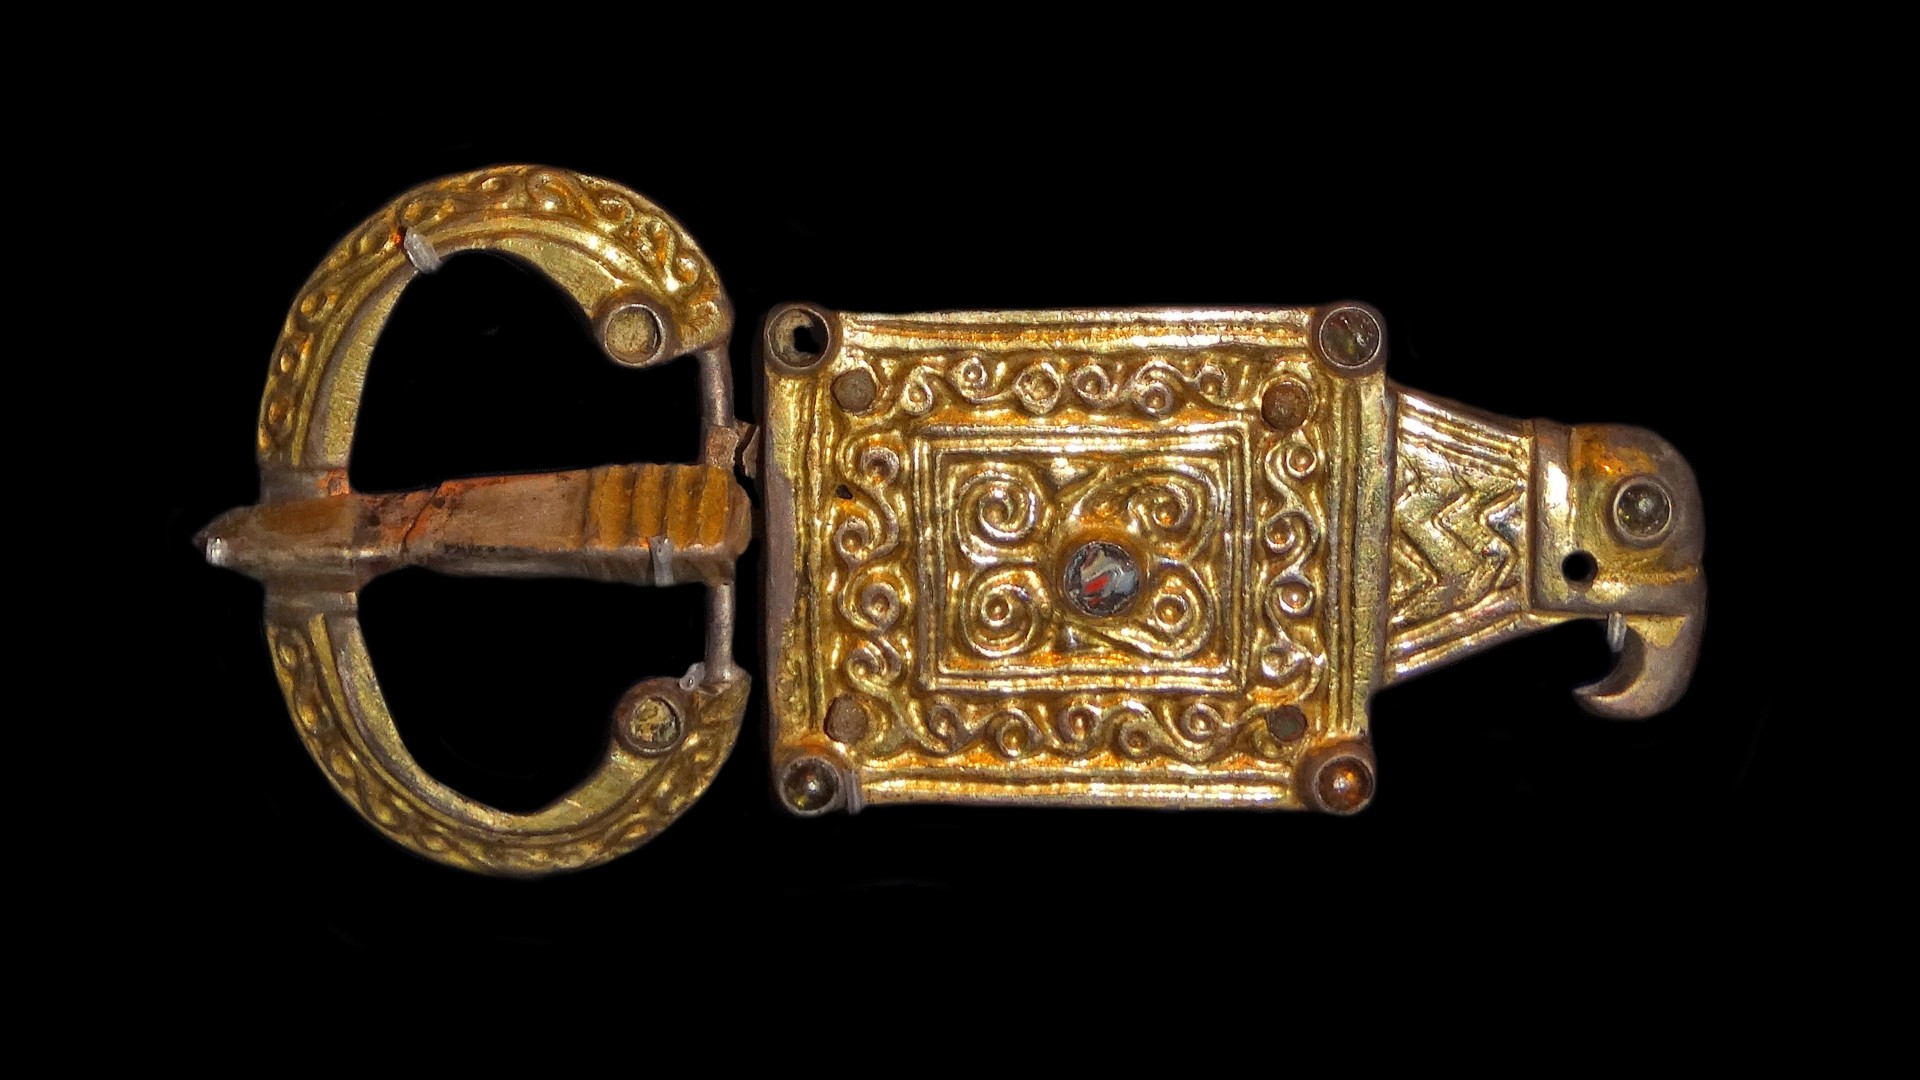 Gothic style buckle with rectangular plate deriving from Roman forms. The decoration reveals regional Gothic fashion. The gilded silver buckle with an eagle's head is typical of the northern Black Sea area which was settled by Crimean Goths. A.D. 400- 660.